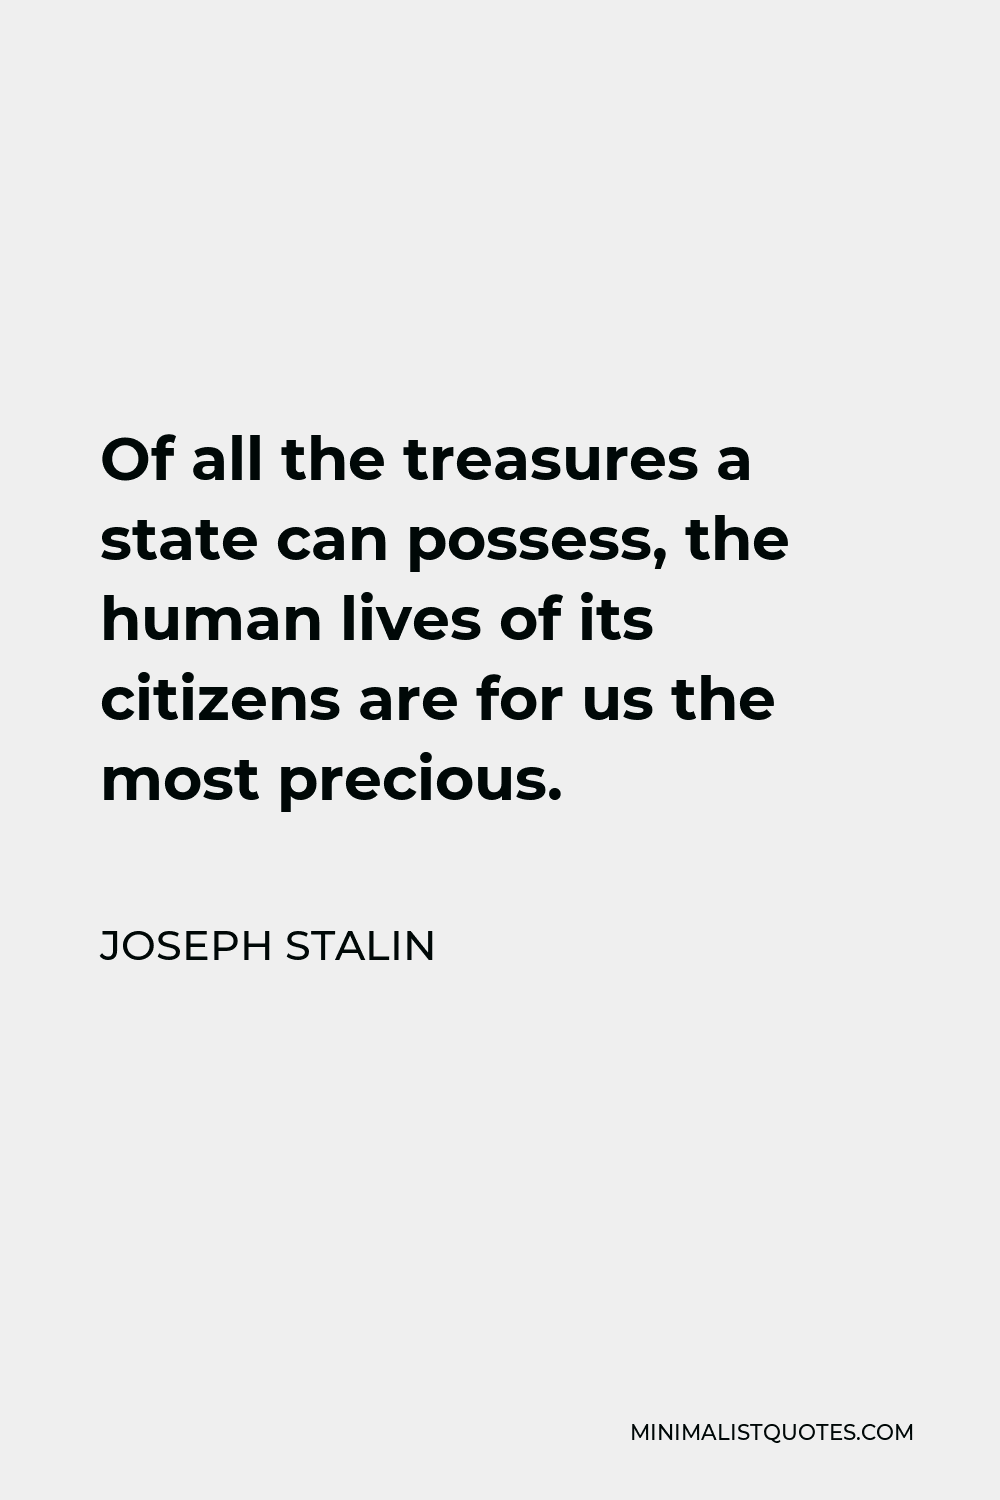 Joseph Stalin Quote - Of all the treasures a state can possess, the human lives of its citizens are for us the most precious.